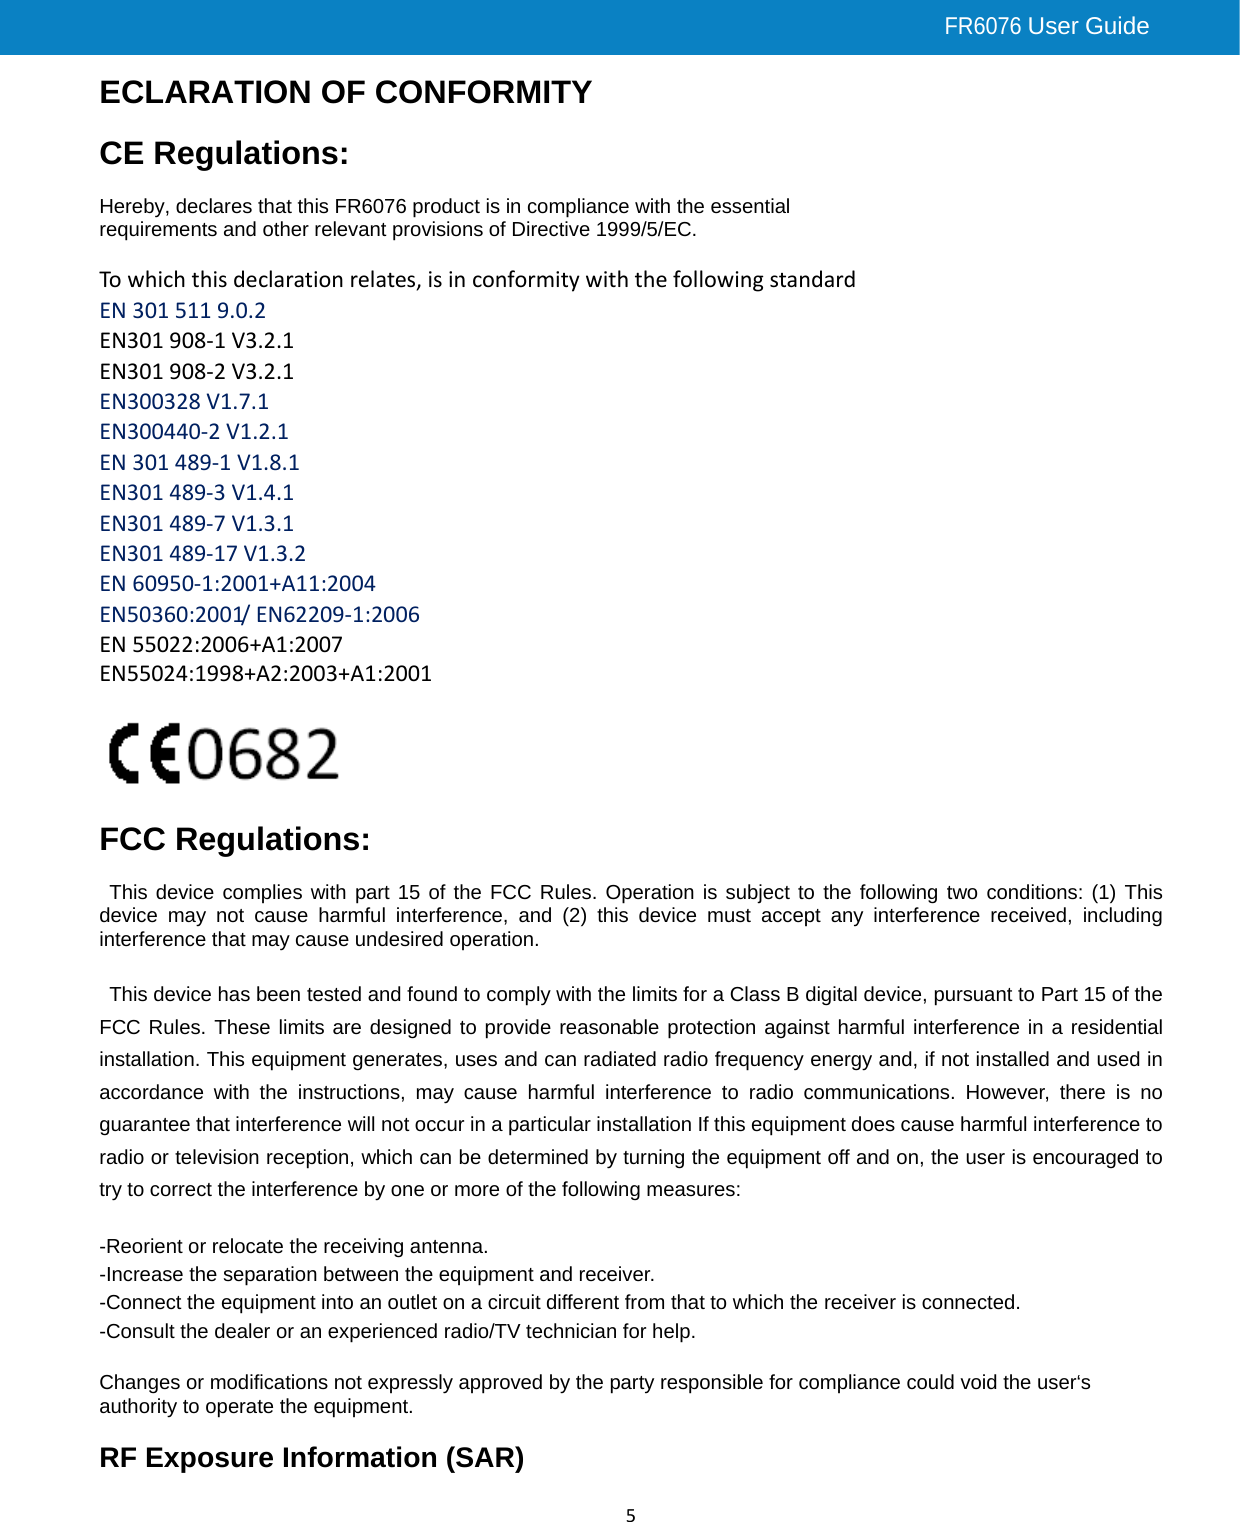 FR6076 User Guide    5ECLARATION OF CONFORMITY  CE Regulations:  Hereby, declares that this FR6076 product is in compliance with the essential requirements and other relevant provisions of Directive 1999/5/EC.    Towhichthisdeclarationrelates,isinconformitywiththefollowingstandard EN3015119.0.2EN301908‐1V3.2.1EN301908‐2V3.2.1EN300328V1.7.1EN300440‐2V1.2.1EN301489‐1V1.8.1EN301489‐3V1.4.1EN301489‐7V1.3.1EN301489‐17V1.3.2EN60950‐1:2001+A11:2004EN50360:2001/EN62209‐1:2006EN55022:2006+A1:2007EN55024:1998+A2:2003+A1:2001   FCC Regulations:  This device complies with part 15 of the FCC Rules. Operation is subject to the following two conditions: (1) This device may not cause harmful interference, and (2) this device must accept any interference received, including interference that may cause undesired operation.  This device has been tested and found to comply with the limits for a Class B digital device, pursuant to Part 15 of the FCC Rules. These limits are designed to provide reasonable protection against harmful interference in a residential installation. This equipment generates, uses and can radiated radio frequency energy and, if not installed and used in accordance with the instructions, may cause harmful interference to radio communications. However, there is no guarantee that interference will not occur in a particular installation If this equipment does cause harmful interference to radio or television reception, which can be determined by turning the equipment off and on, the user is encouraged to try to correct the interference by one or more of the following measures:  -Reorient or relocate the receiving antenna. -Increase the separation between the equipment and receiver. -Connect the equipment into an outlet on a circuit different from that to which the receiver is connected. -Consult the dealer or an experienced radio/TV technician for help.  Changes or modifications not expressly approved by the party responsible for compliance could void the user‘s authority to operate the equipment.  RF Exposure Information (SAR) 